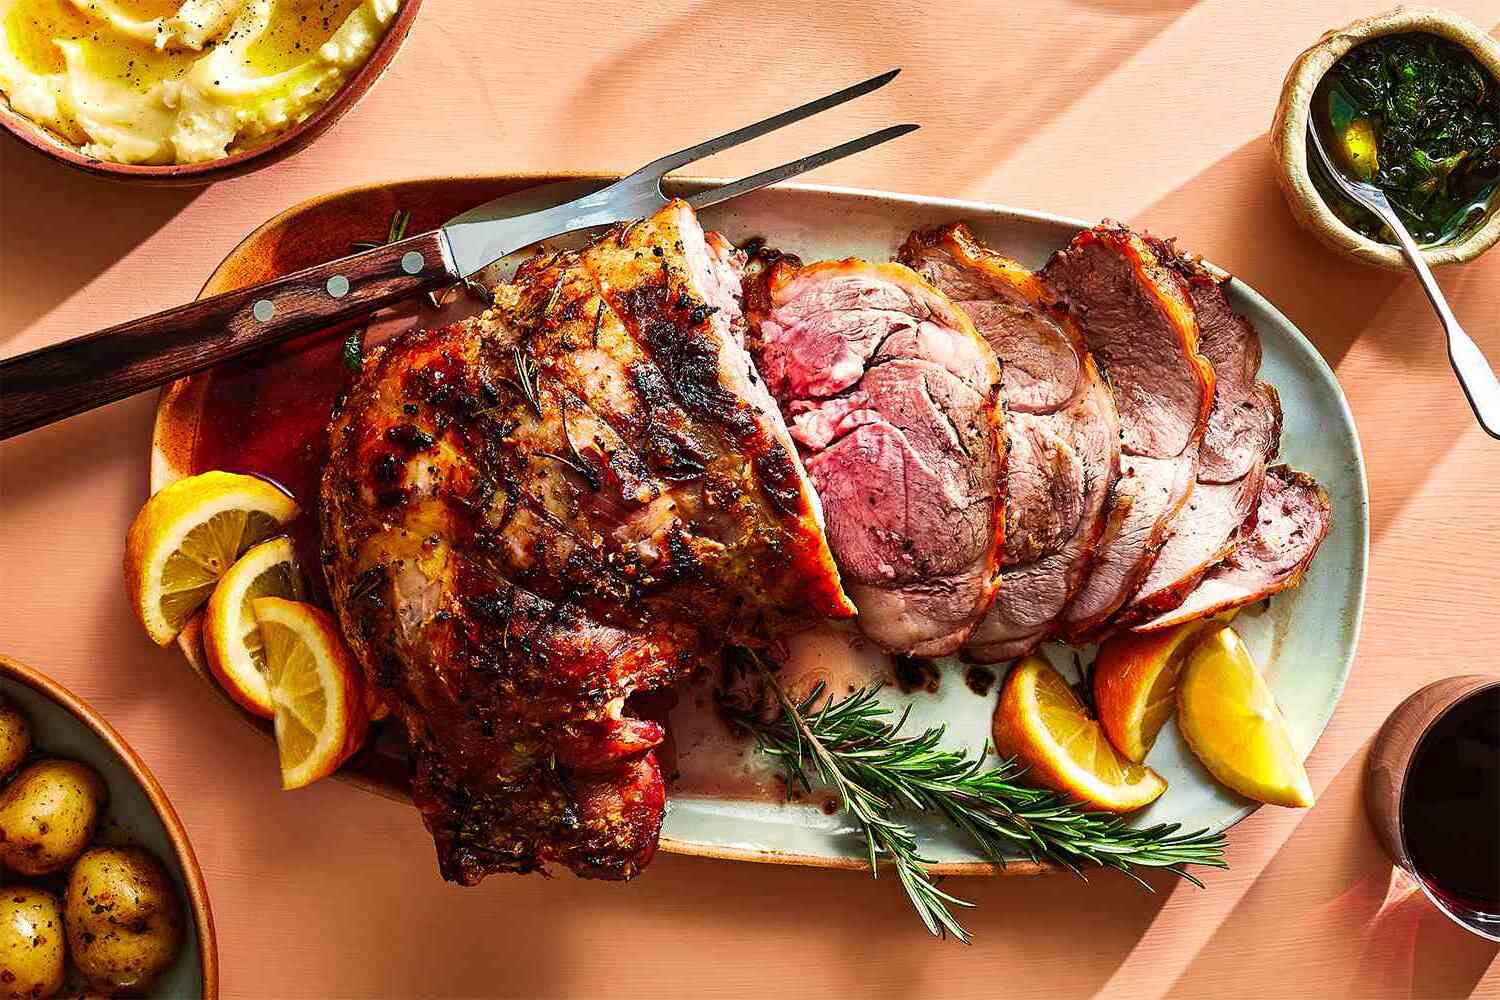 10-facts-about-national-roast-leg-of-lamb-day-may-7th